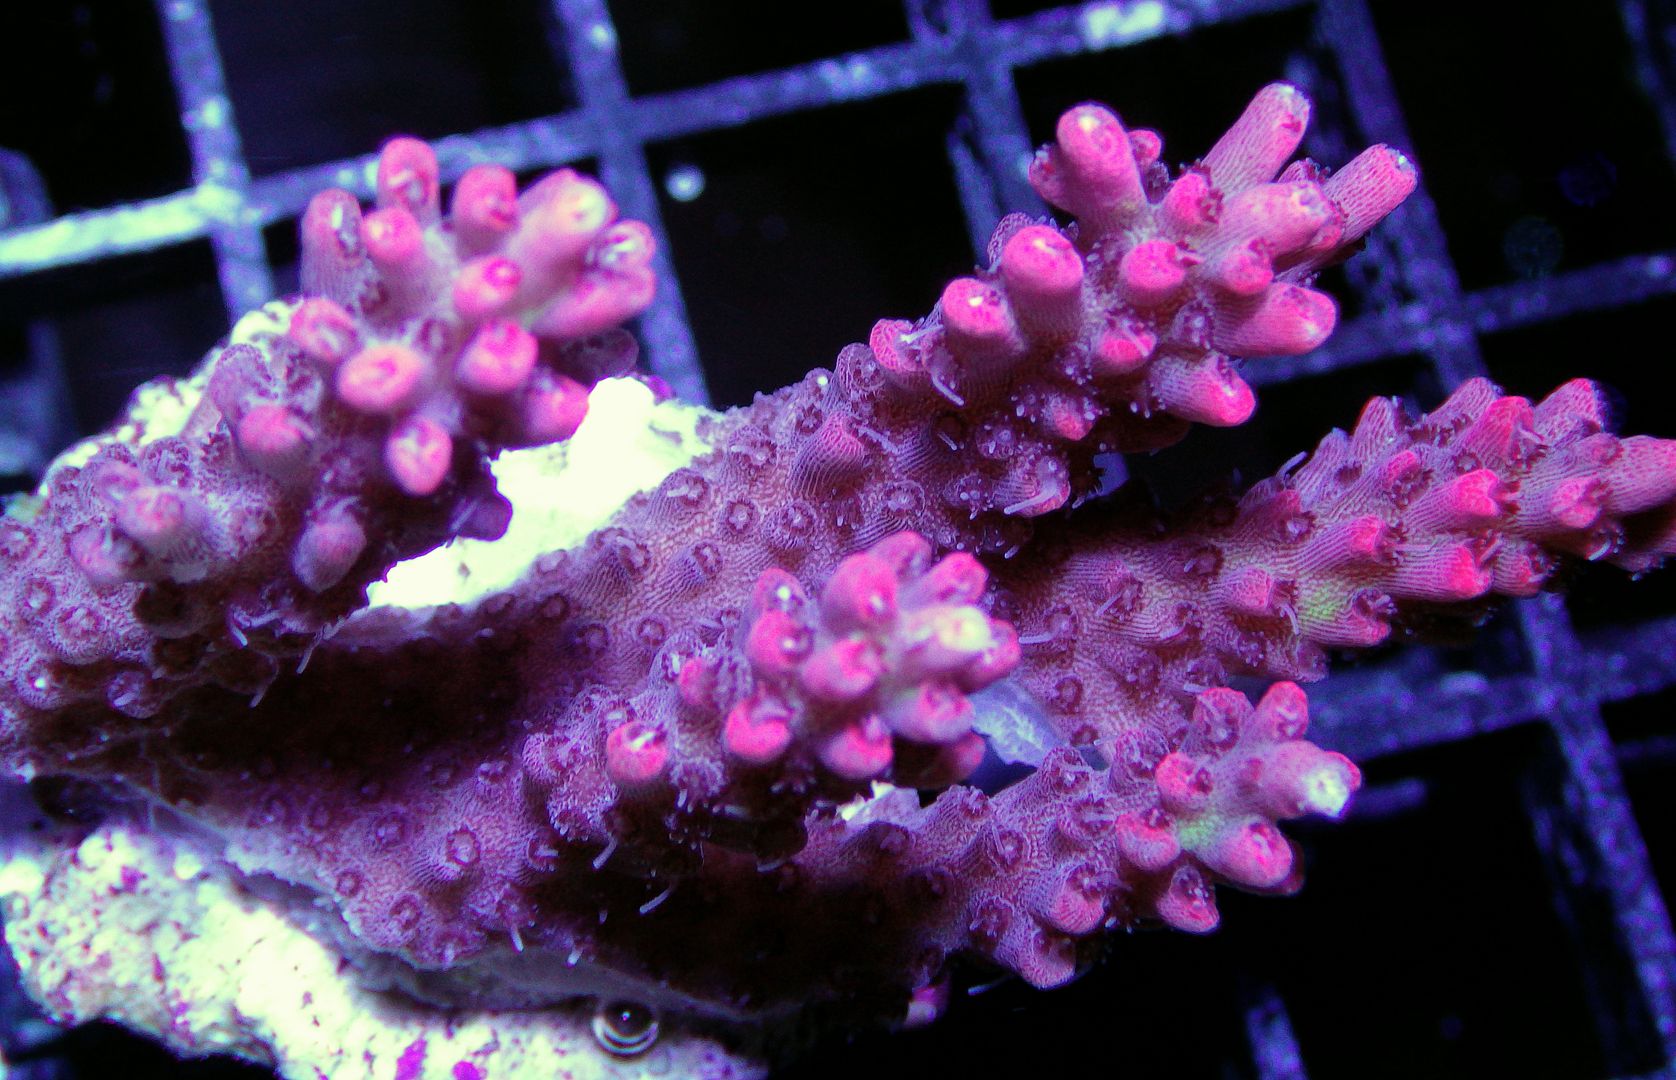 RIMG07032 zpshcylwar8 - Chunky Frags posted on New Site